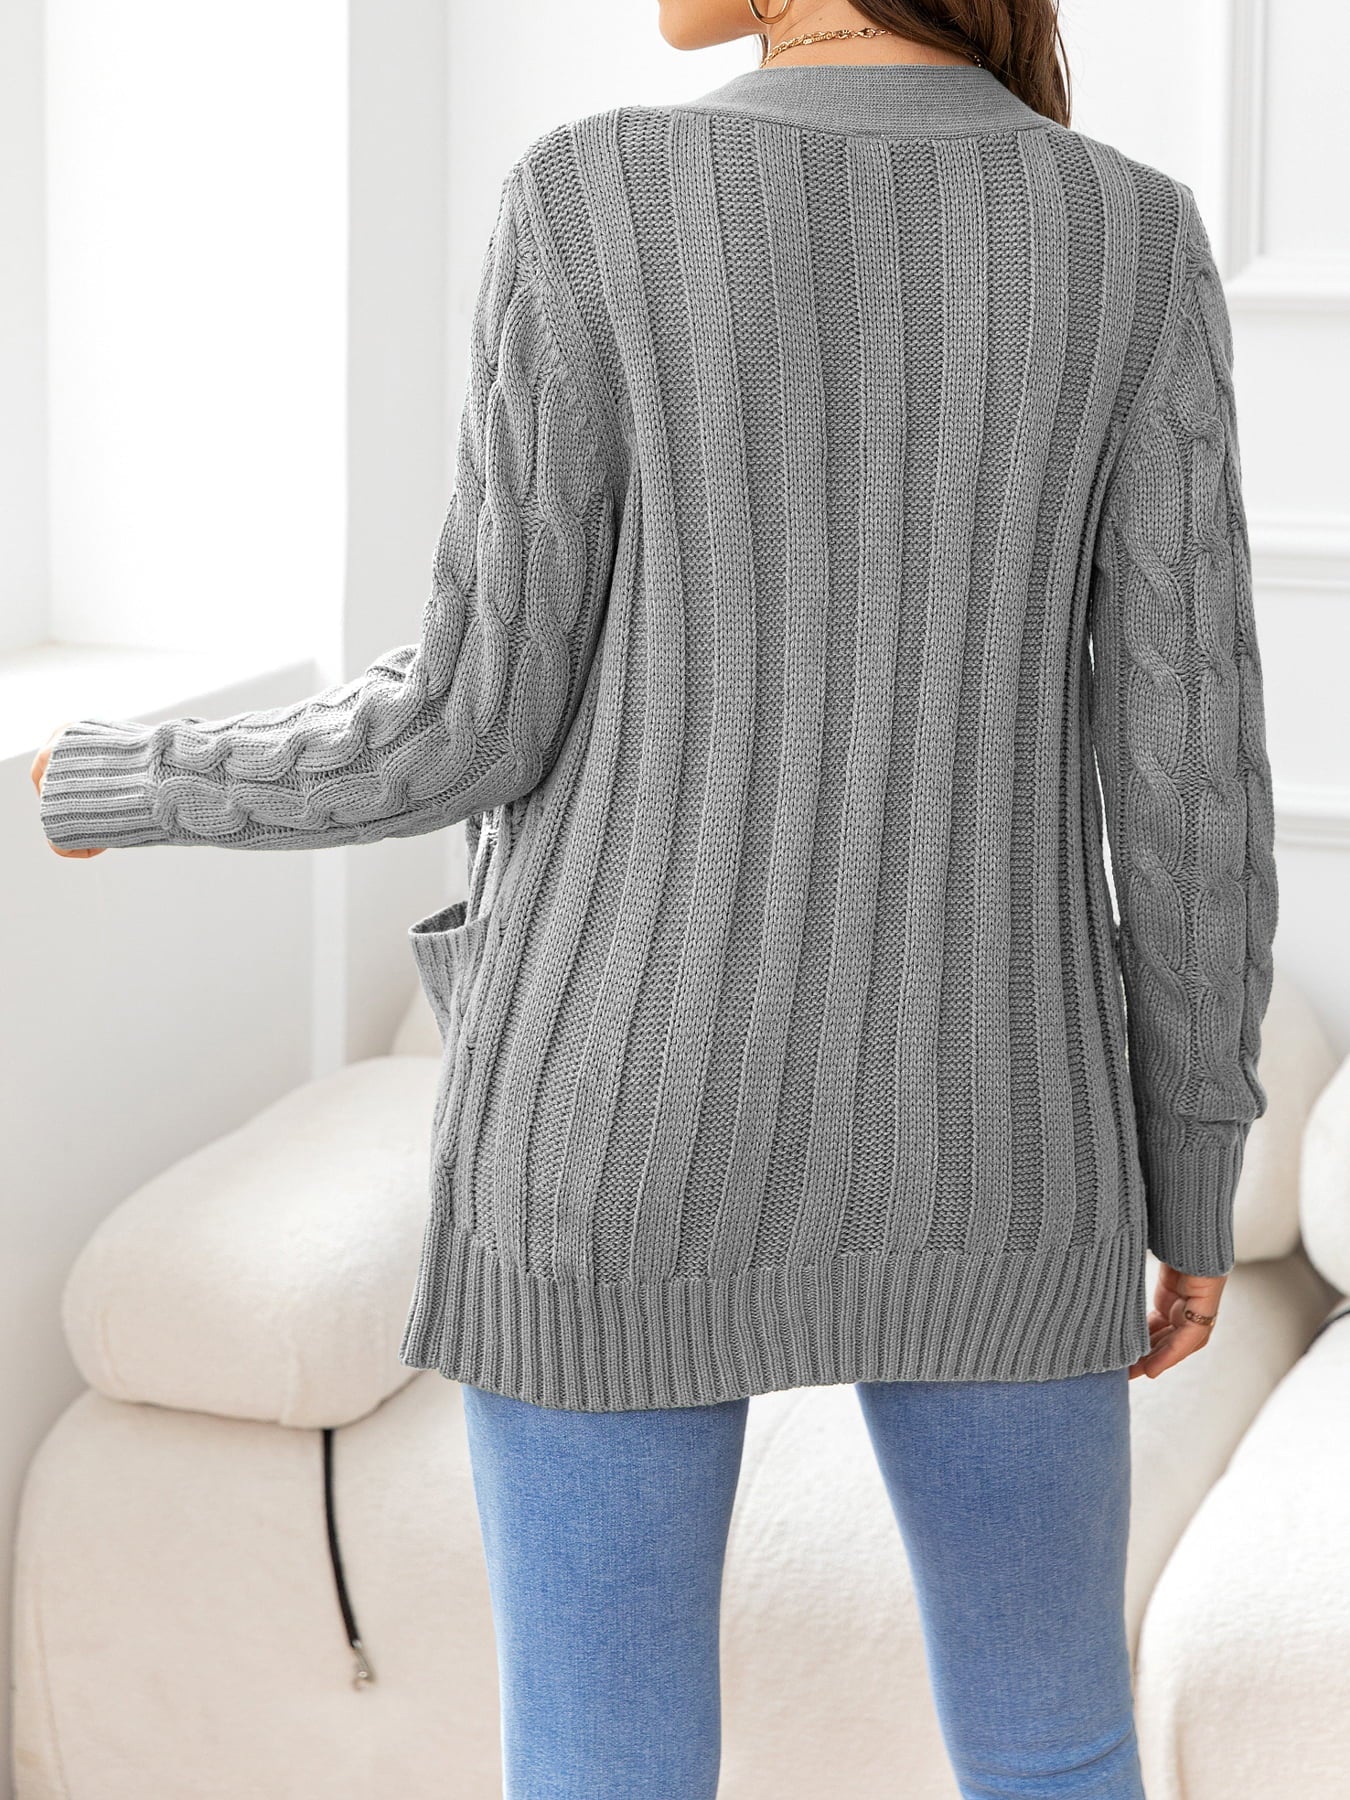 Button Down Cable-Knit Cardigan - Women’s Clothing & Accessories - Shirts & Tops - 33 - 2024